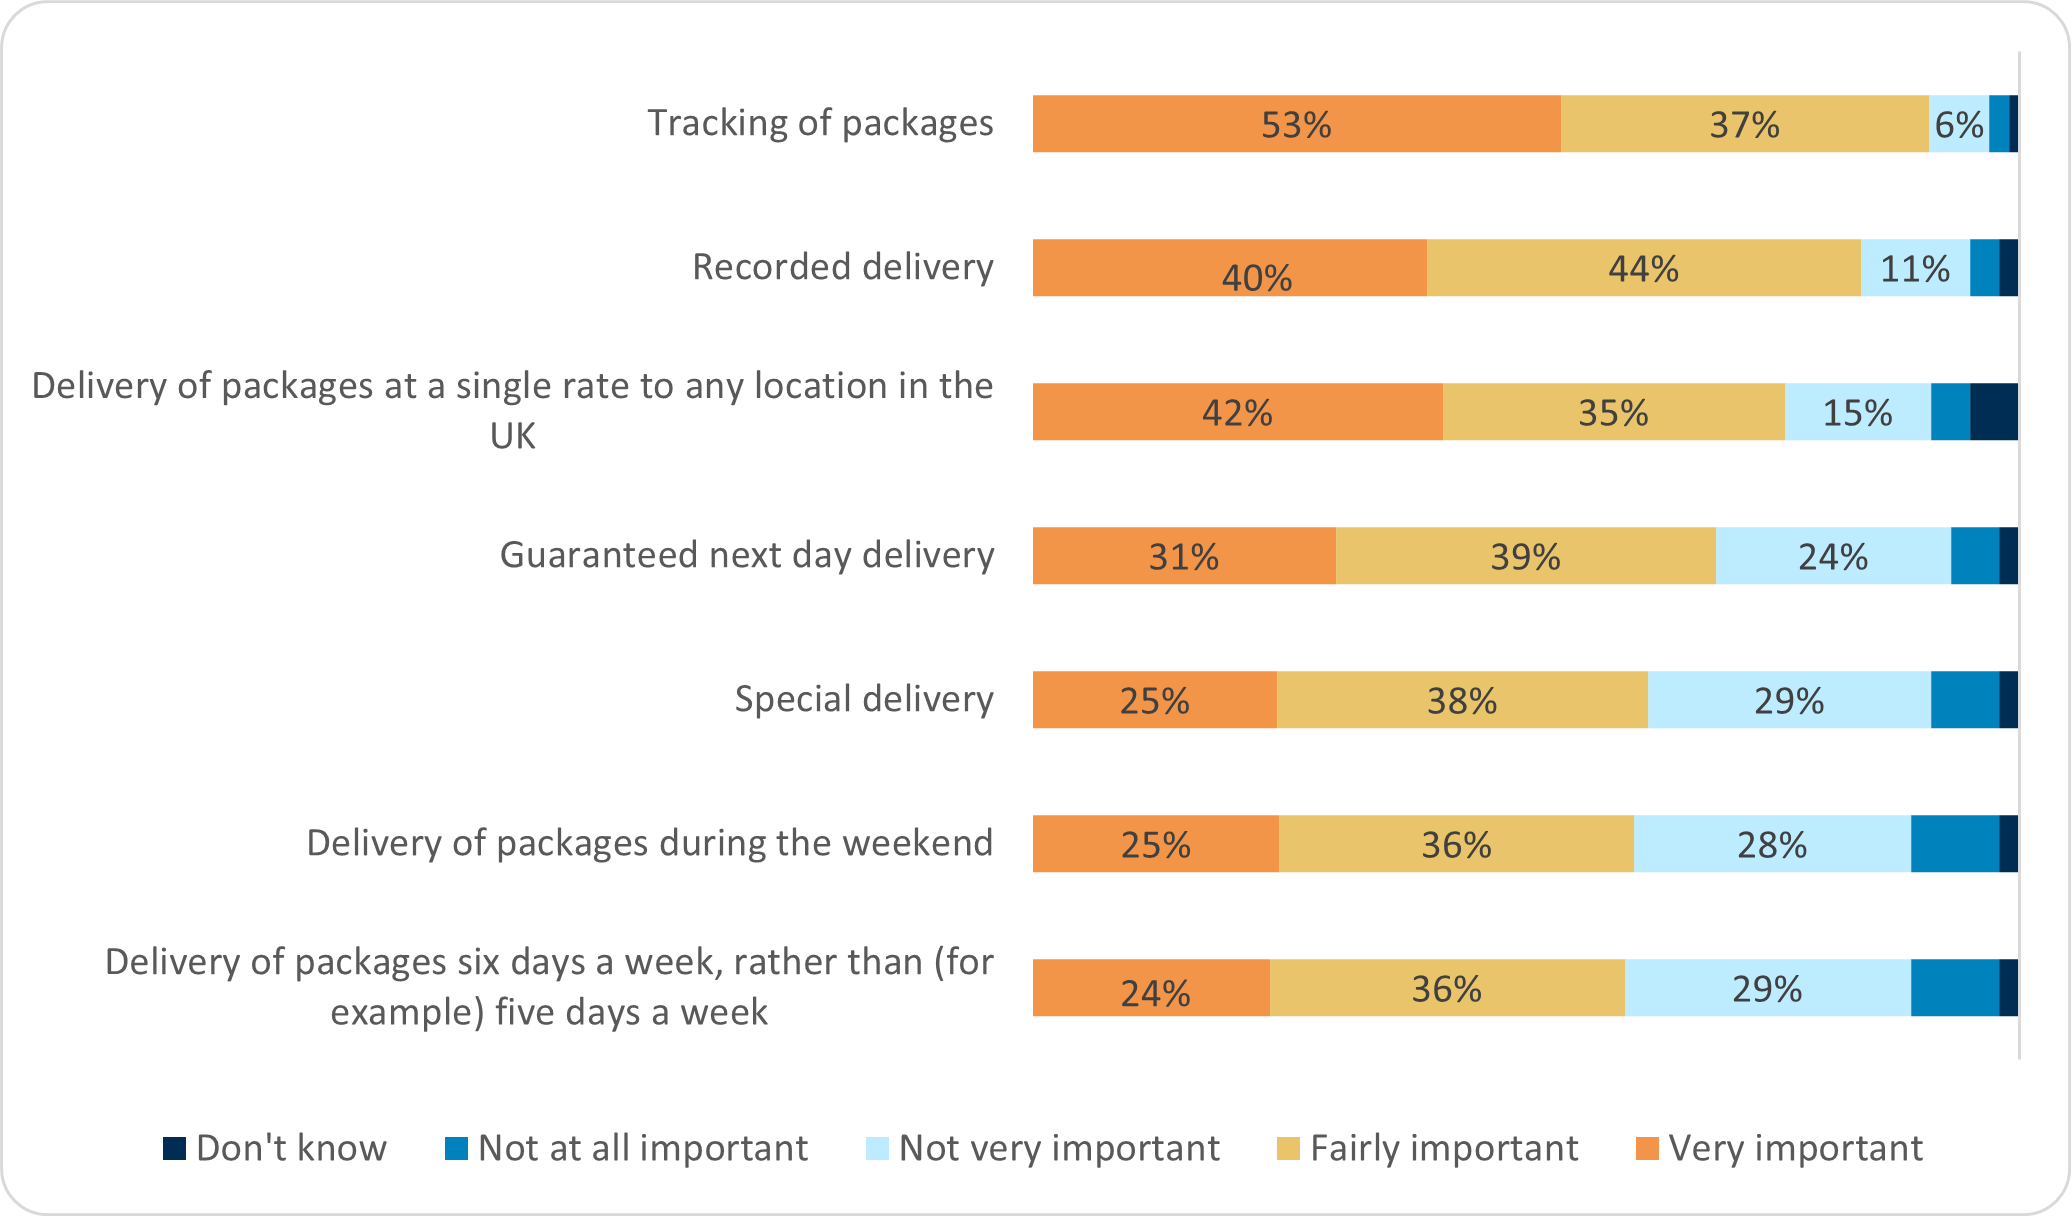 There is a range of consumers opinions on different aspects of the Universal Service Obligation. Tracking of packages had a net importance of 90%,  Recorded delivery net importance of 85%, single rate of delivery charge at 77%, guaranteed next day delivery 69%, special delivery 62%, delivery of packages at the weekend 61% and delivery of packages six days a week 60%